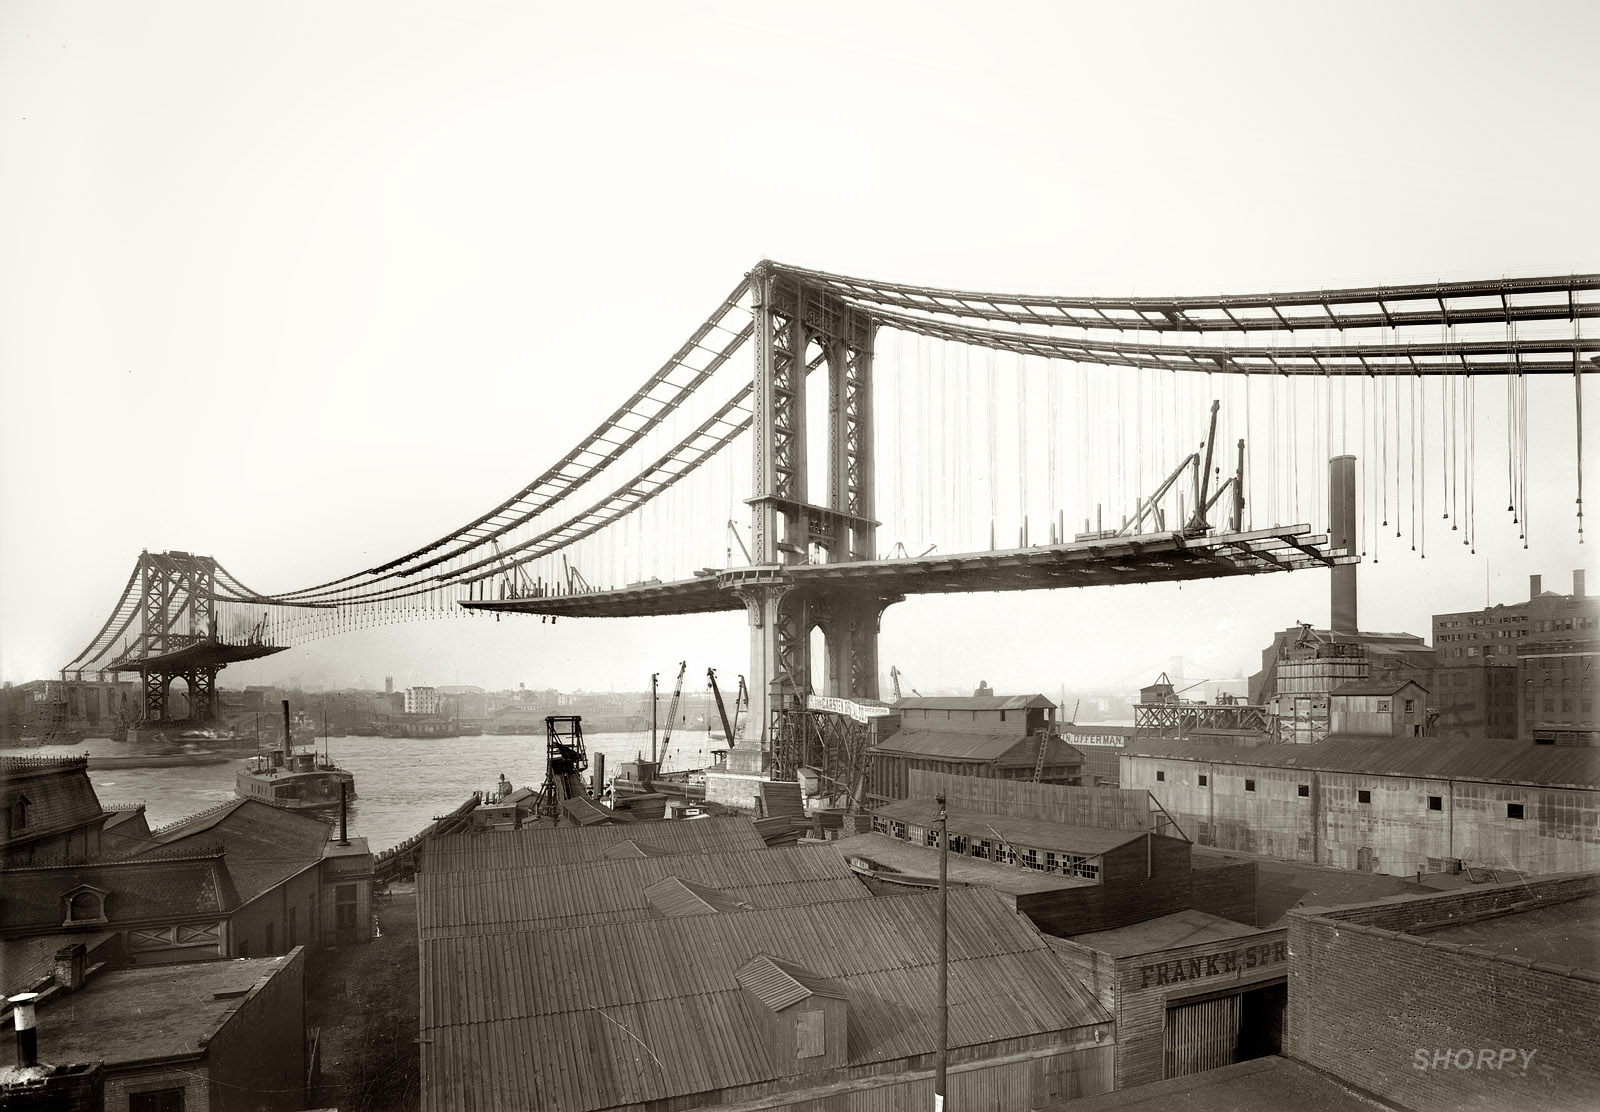 March 23, 1909. Construction of the Manhattan Bridge as seen from Brooklyn. 8x10 glass negative, George Grantham Bain Collection. View full size.